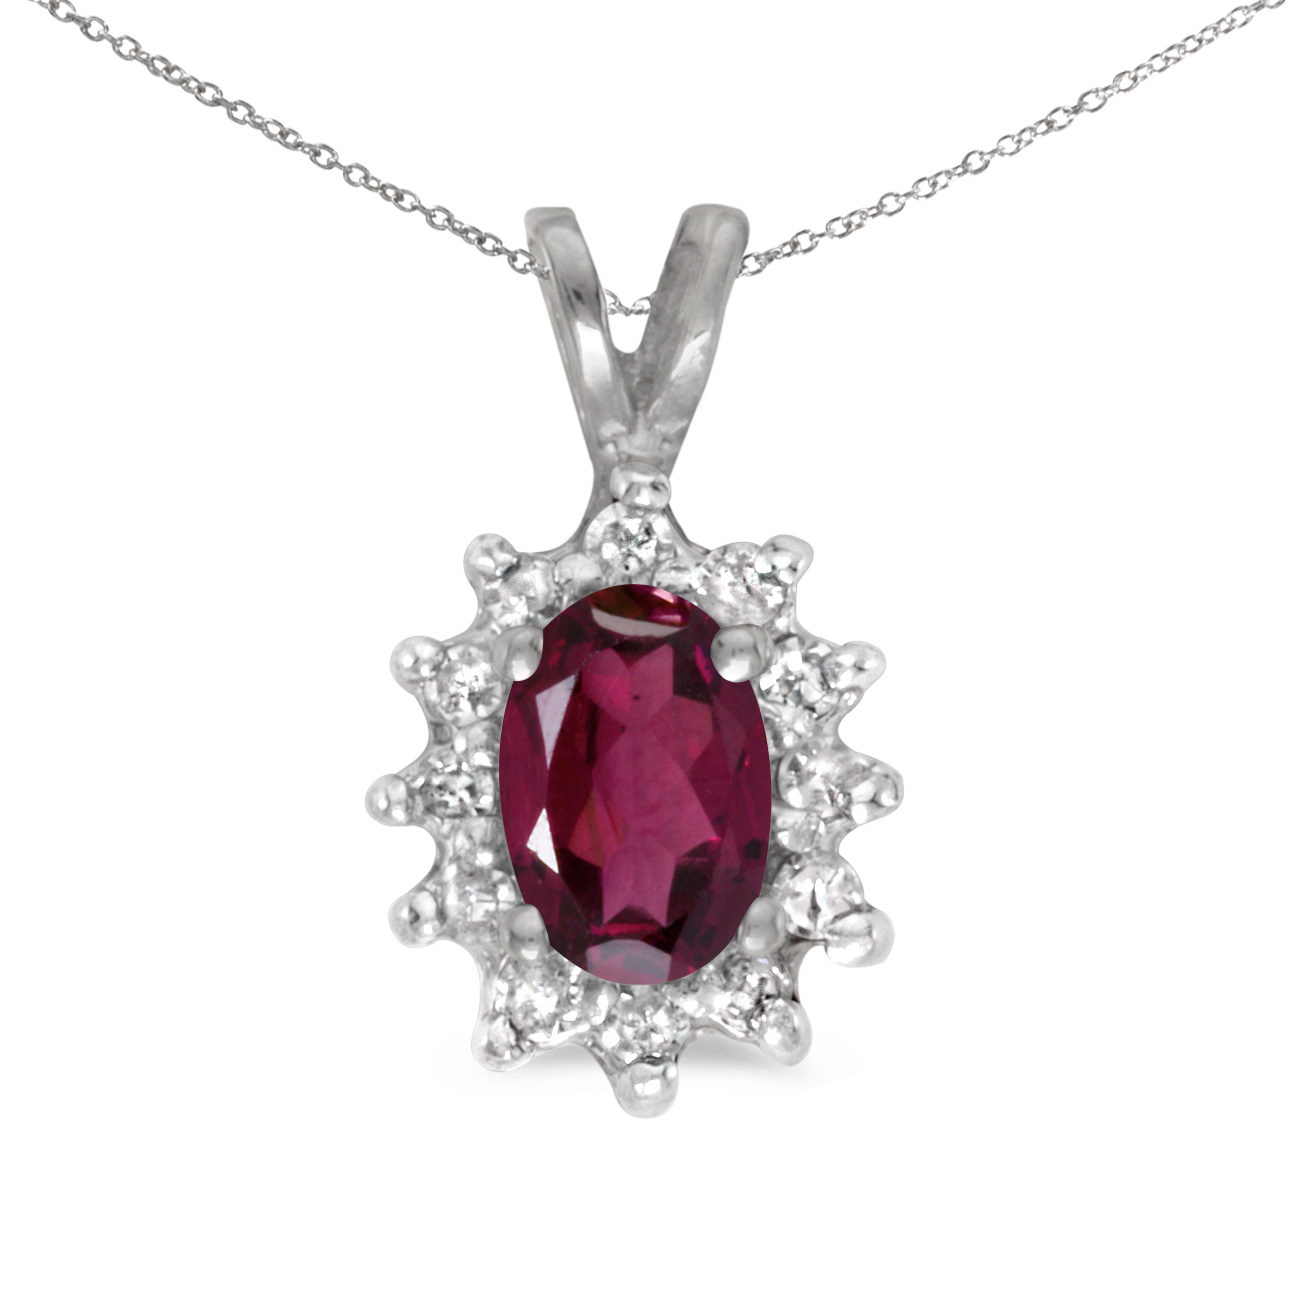 This 14k white gold oval rhodolite garnet and diamond pendant features a 6x4 mm genuine natural r...